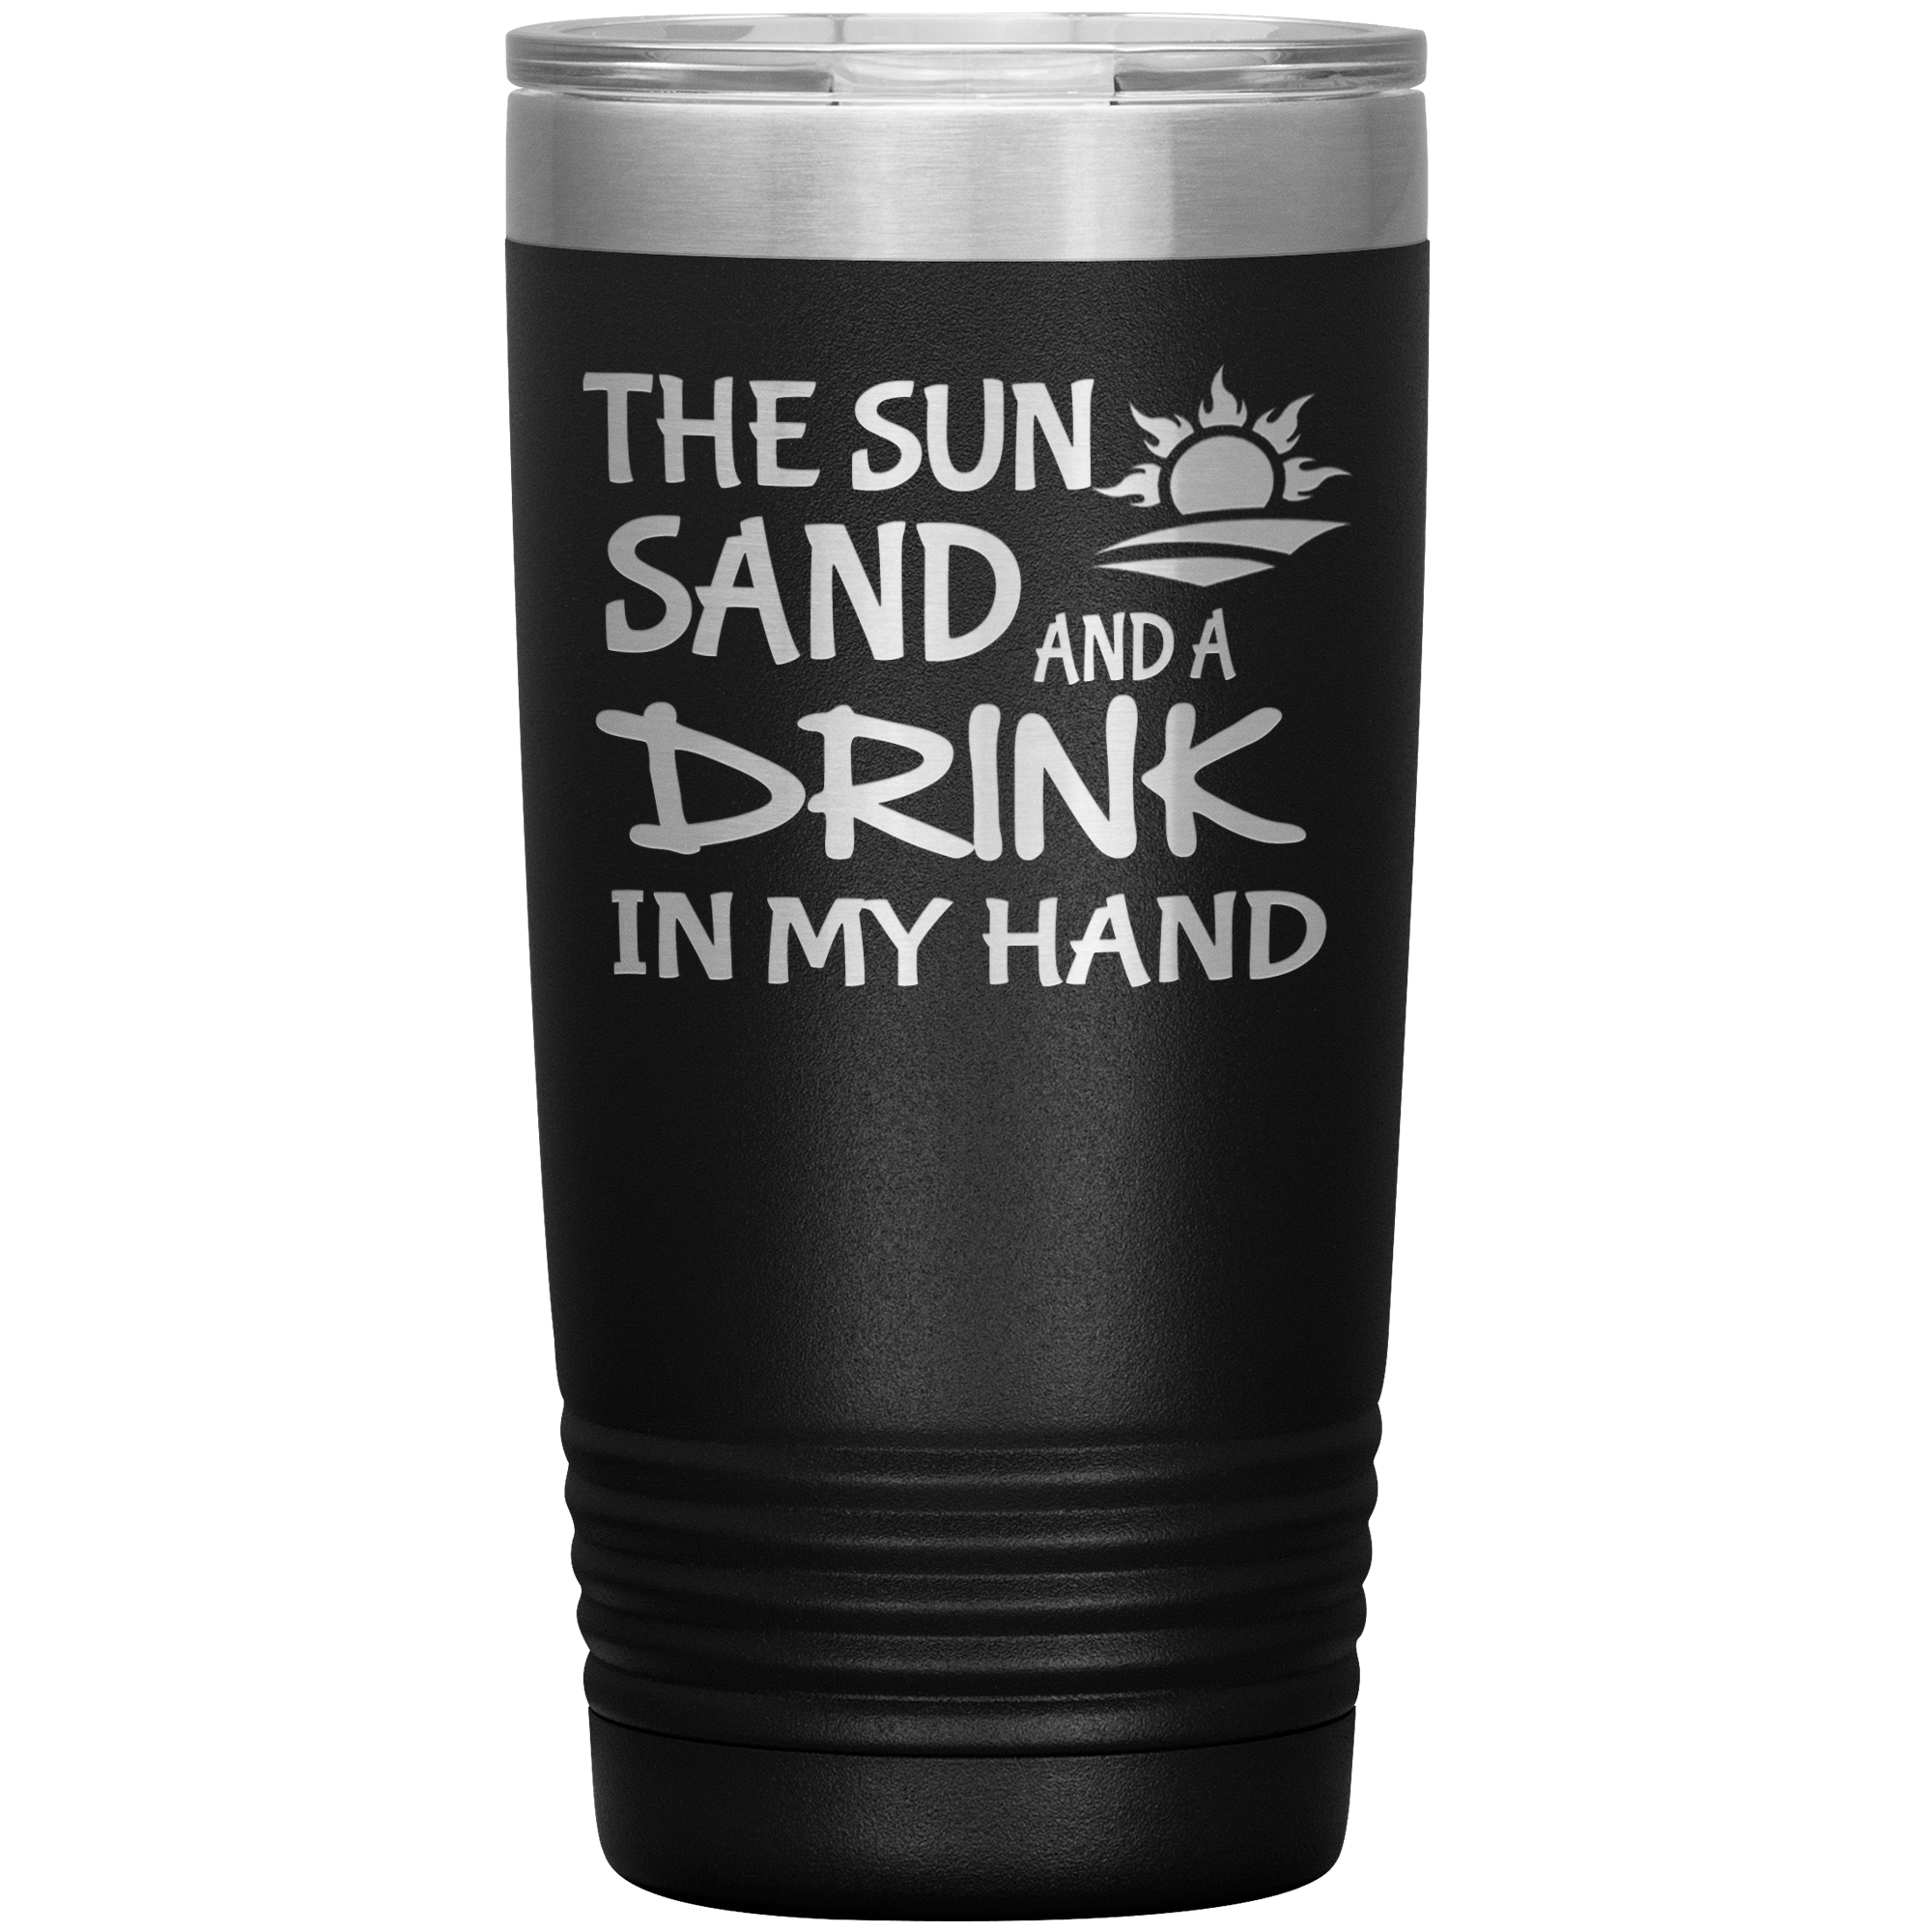 "THE SUN SAND AND A DRINK IN MY HAND" Tumbler